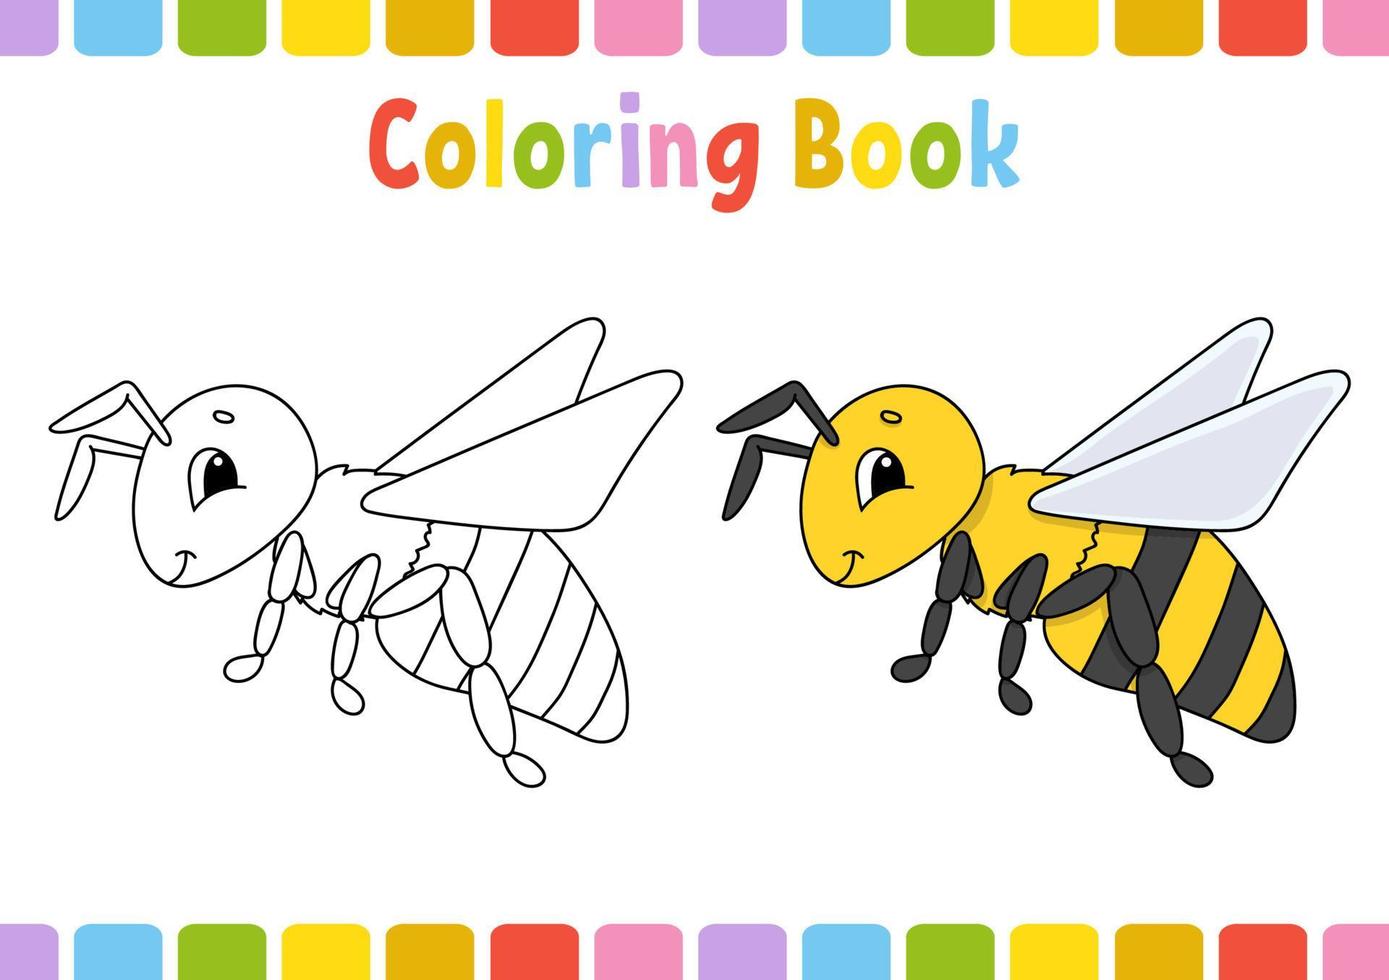 Bee. Coloring book for kids. Cheerful character. Vector illustration. Cute cartoon style. Hand drawn. Fantasy page for children. Isolated on white background.